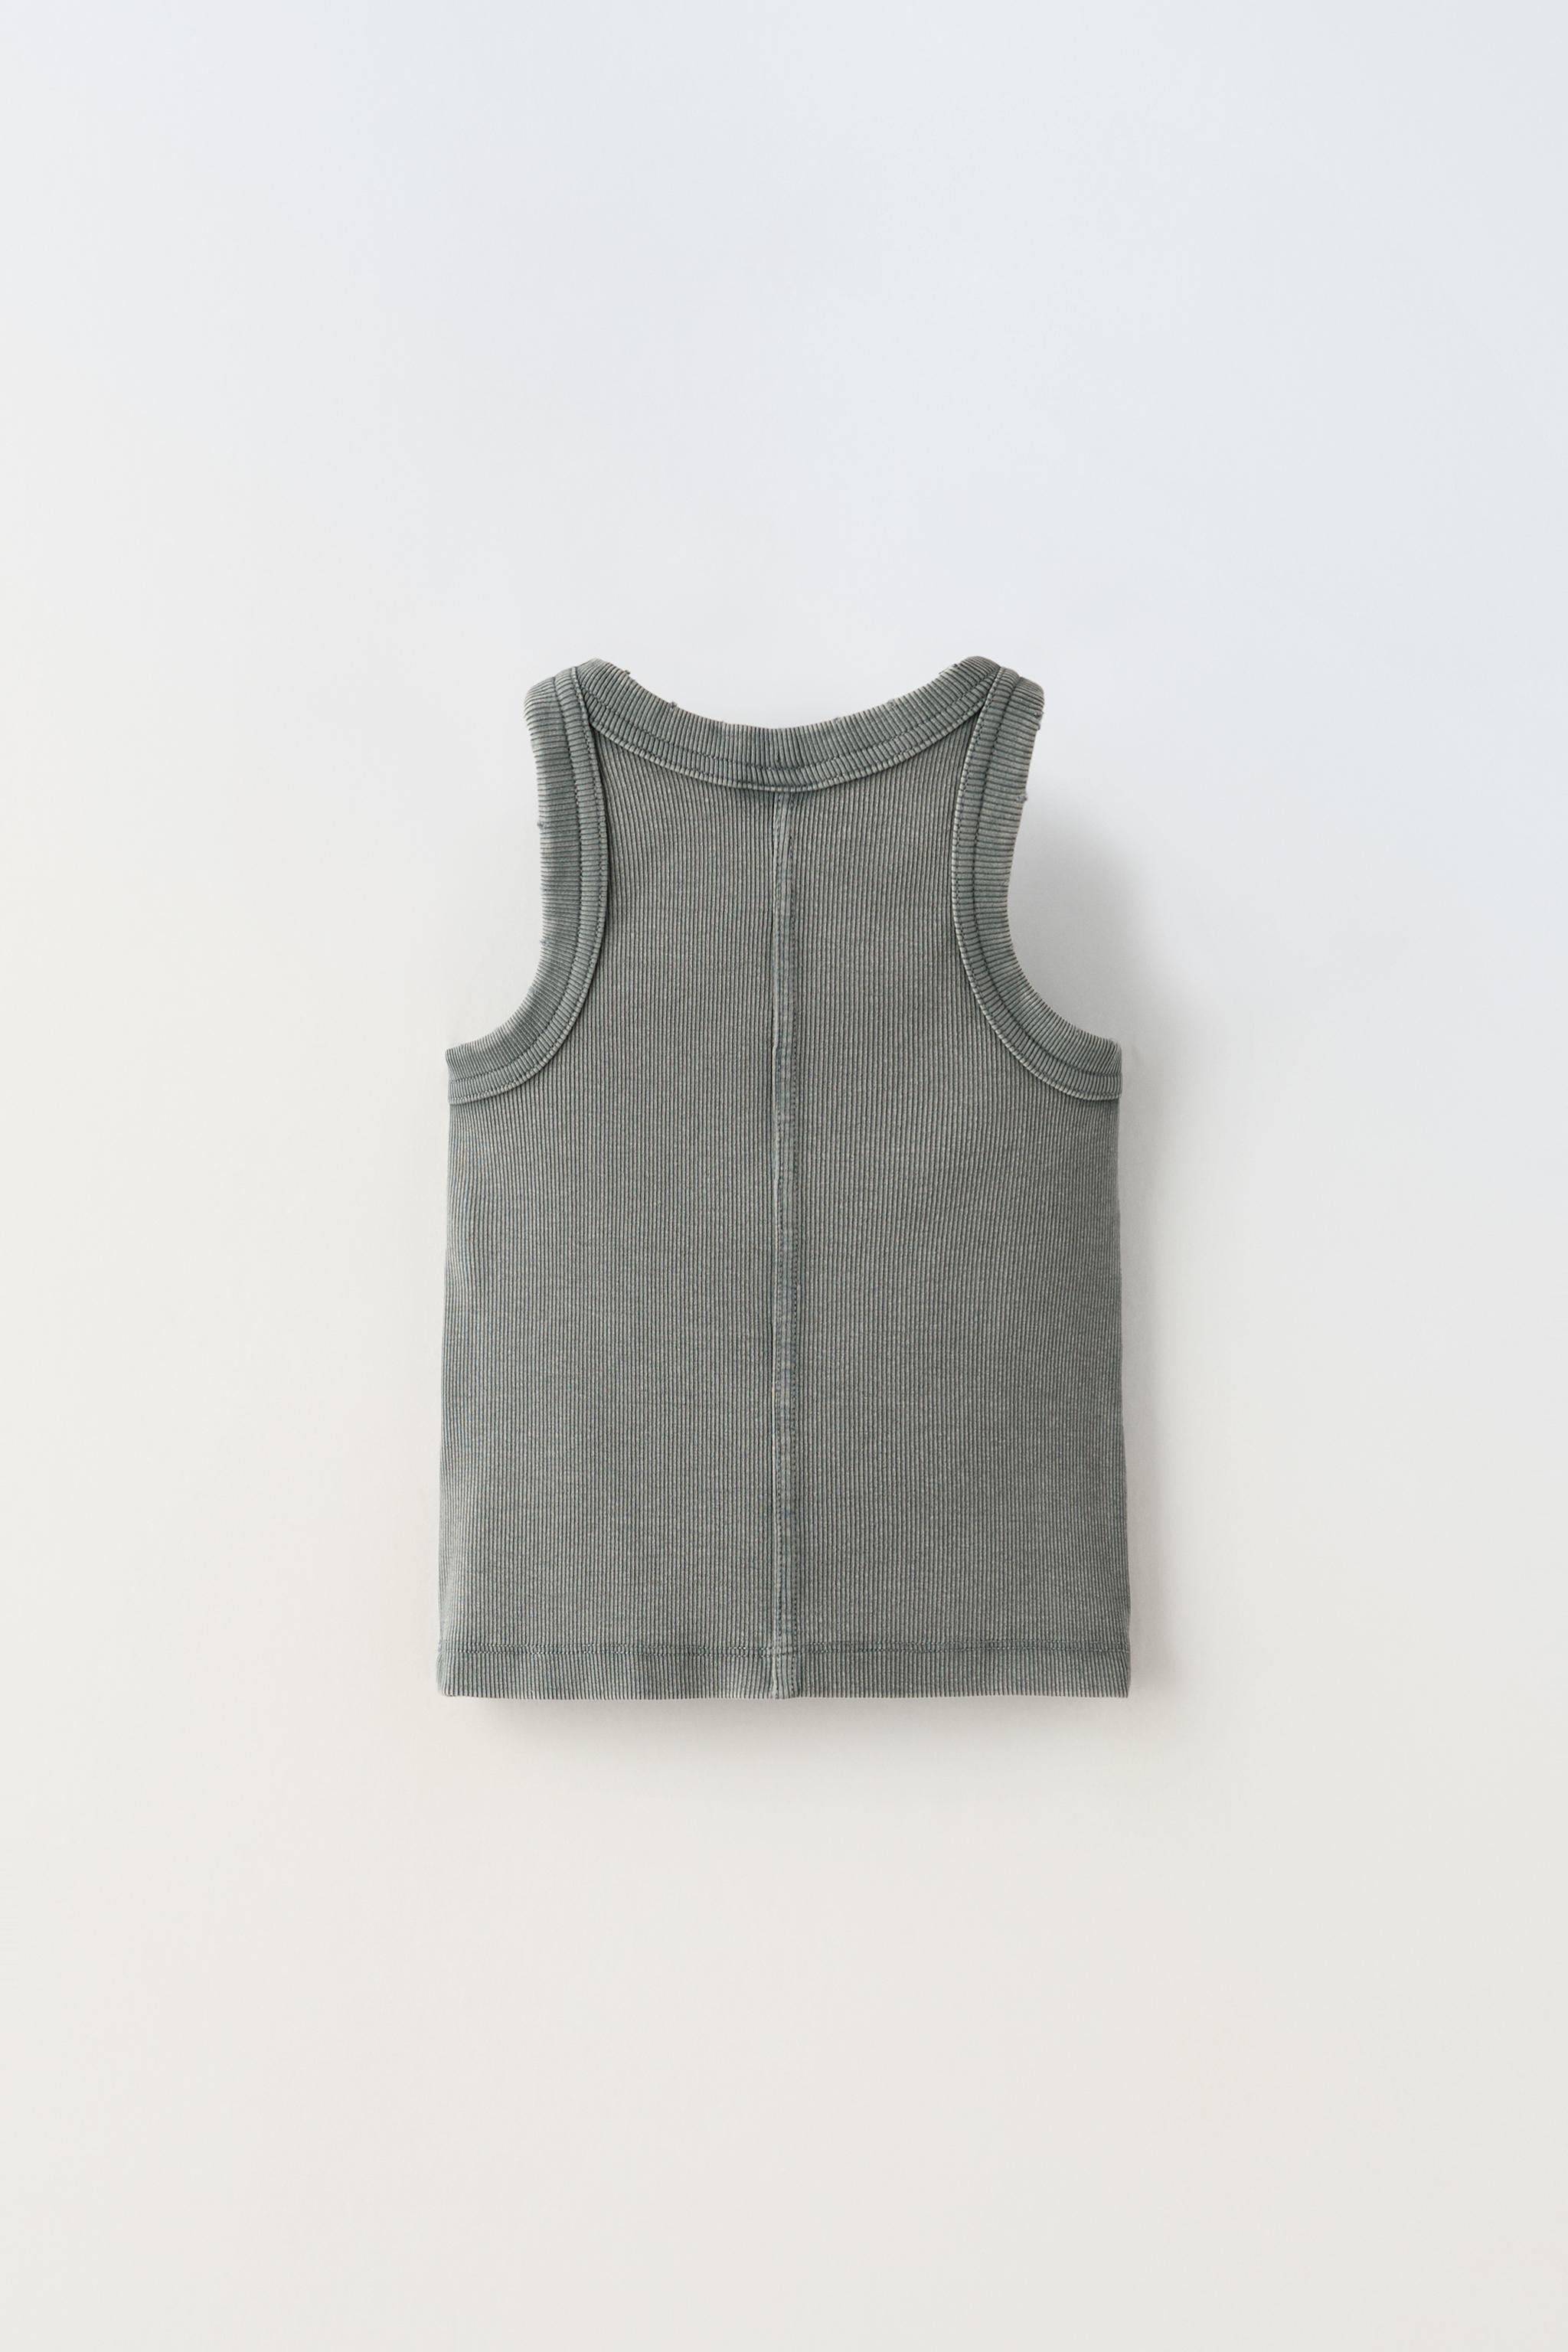 WASHED EFFECT RIBBED T-SHIRT - Anthracite grey